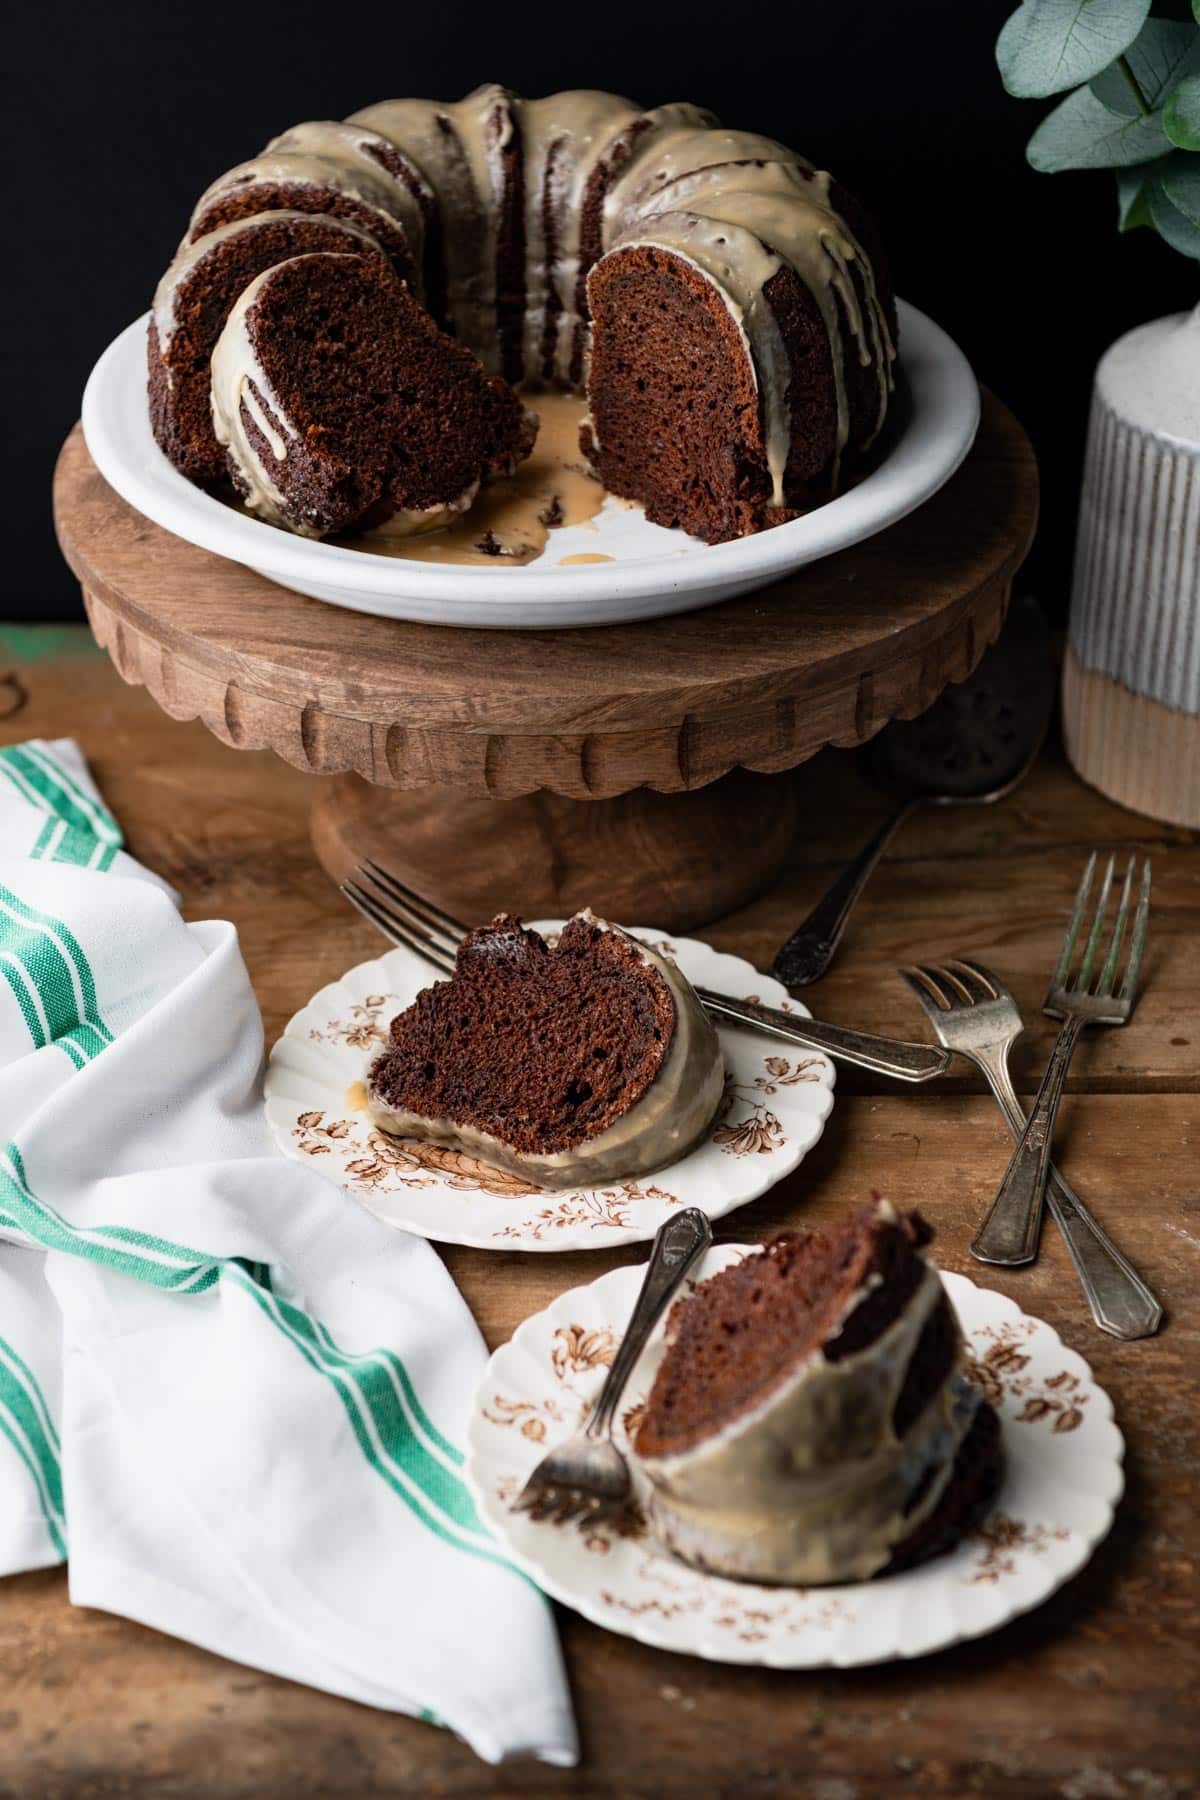 Two slices of guinness chocolate Bundt cake on a wooden table.